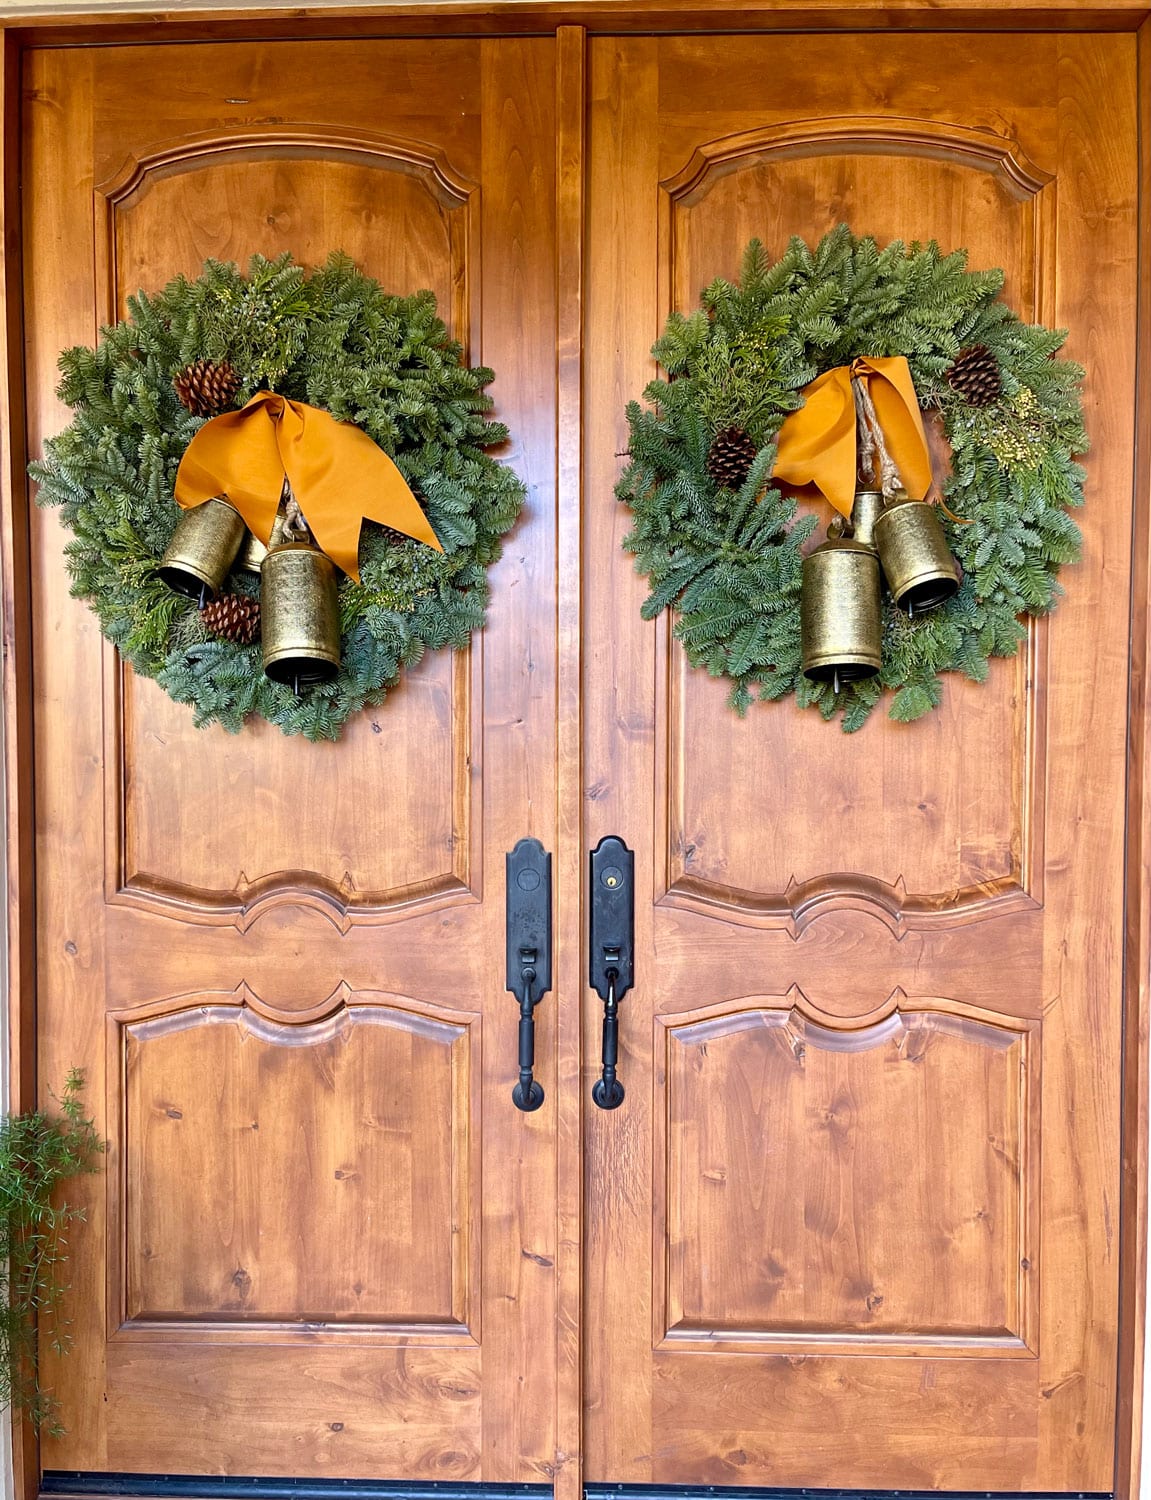 Cindy Hattersley's front doors decorated for Christmas